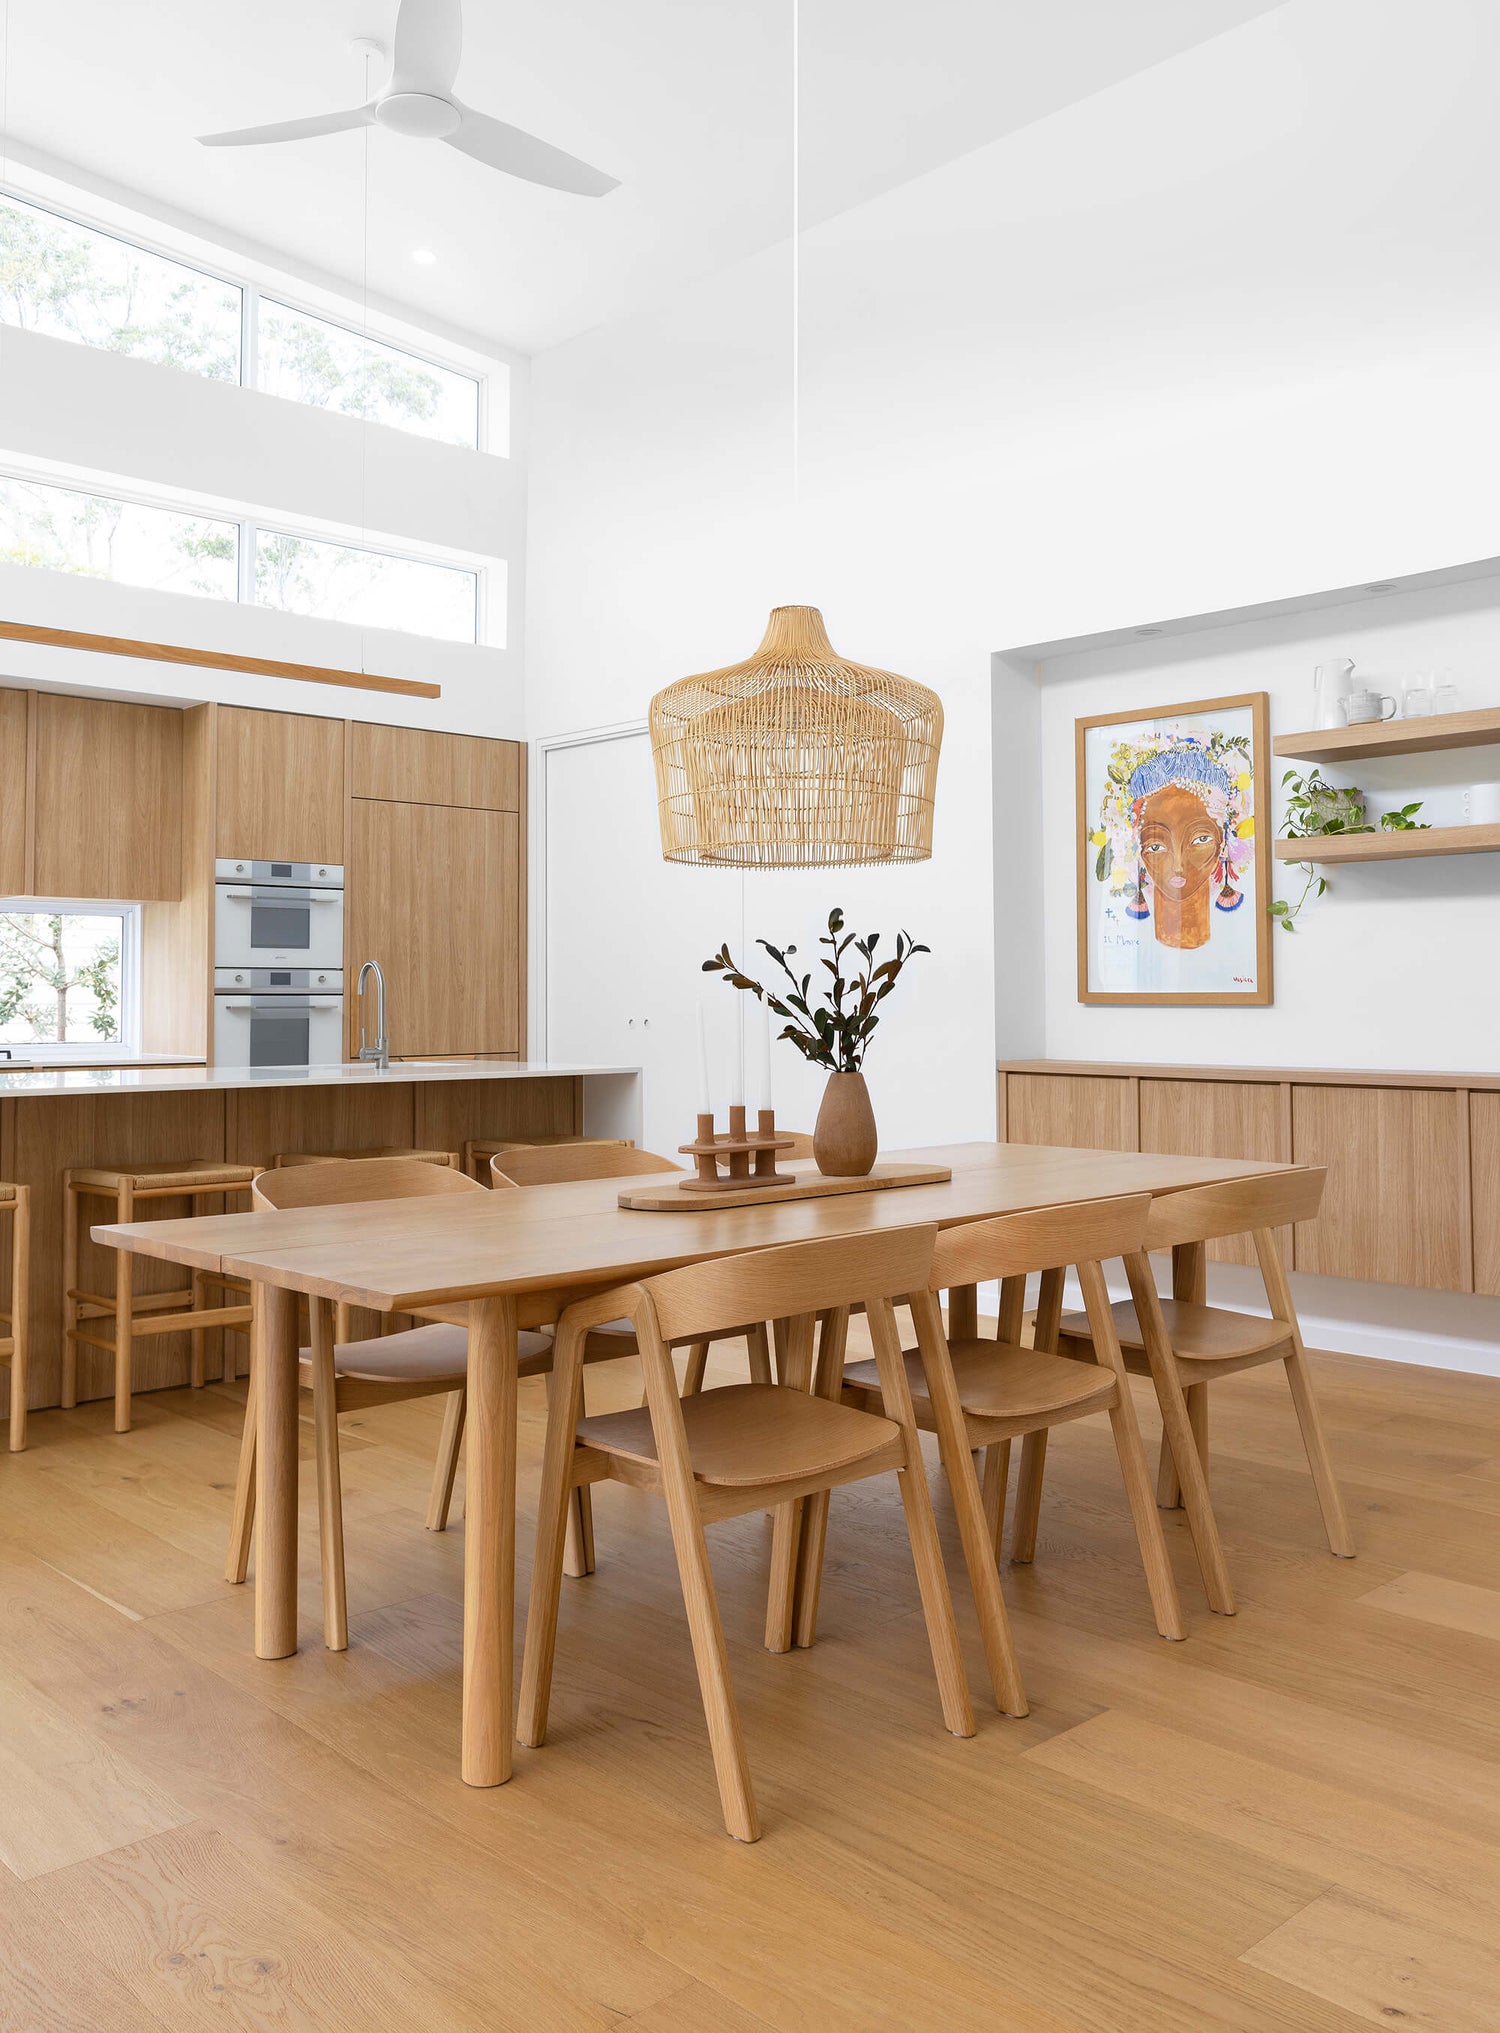 Henley dining room pendant light hangs abvoe a six-seater rectangular timber dining table.